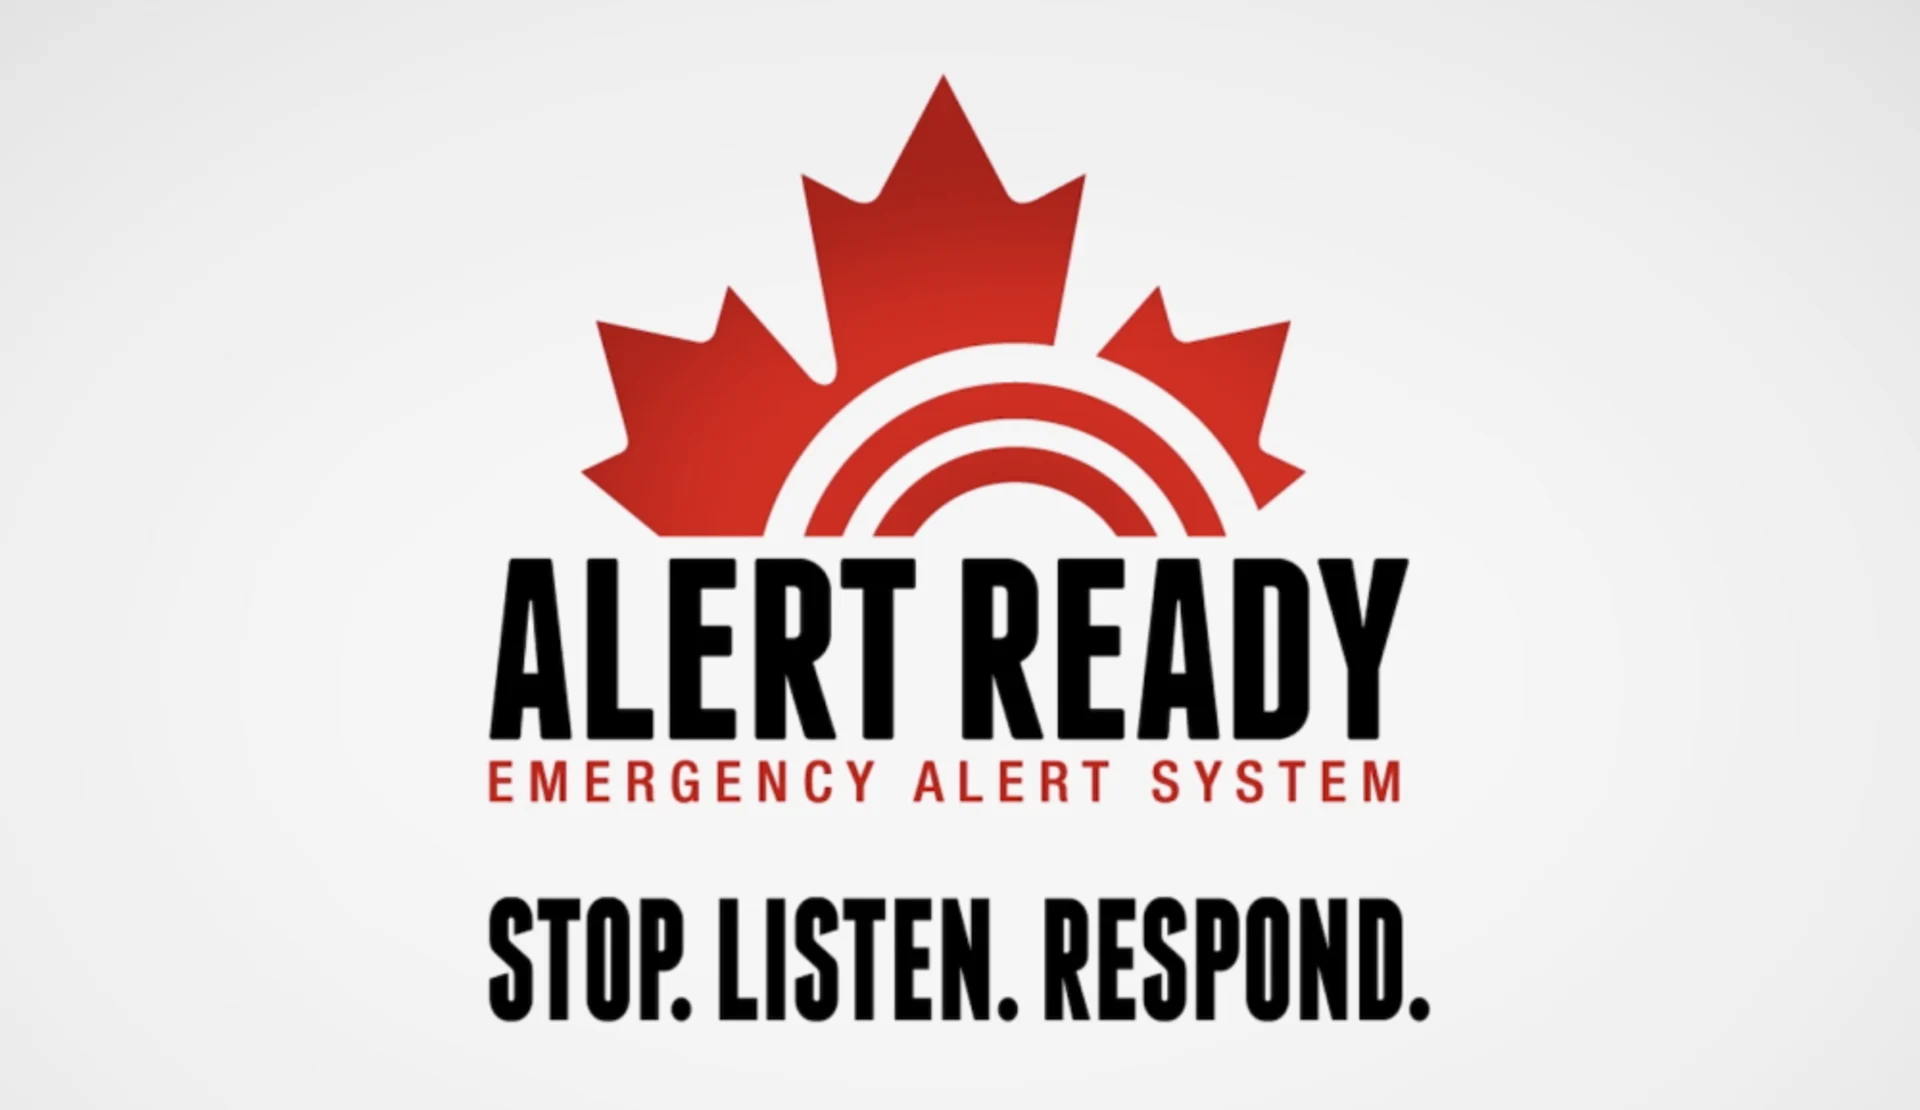 Nationwide test of Canada’s public alerting system happening today